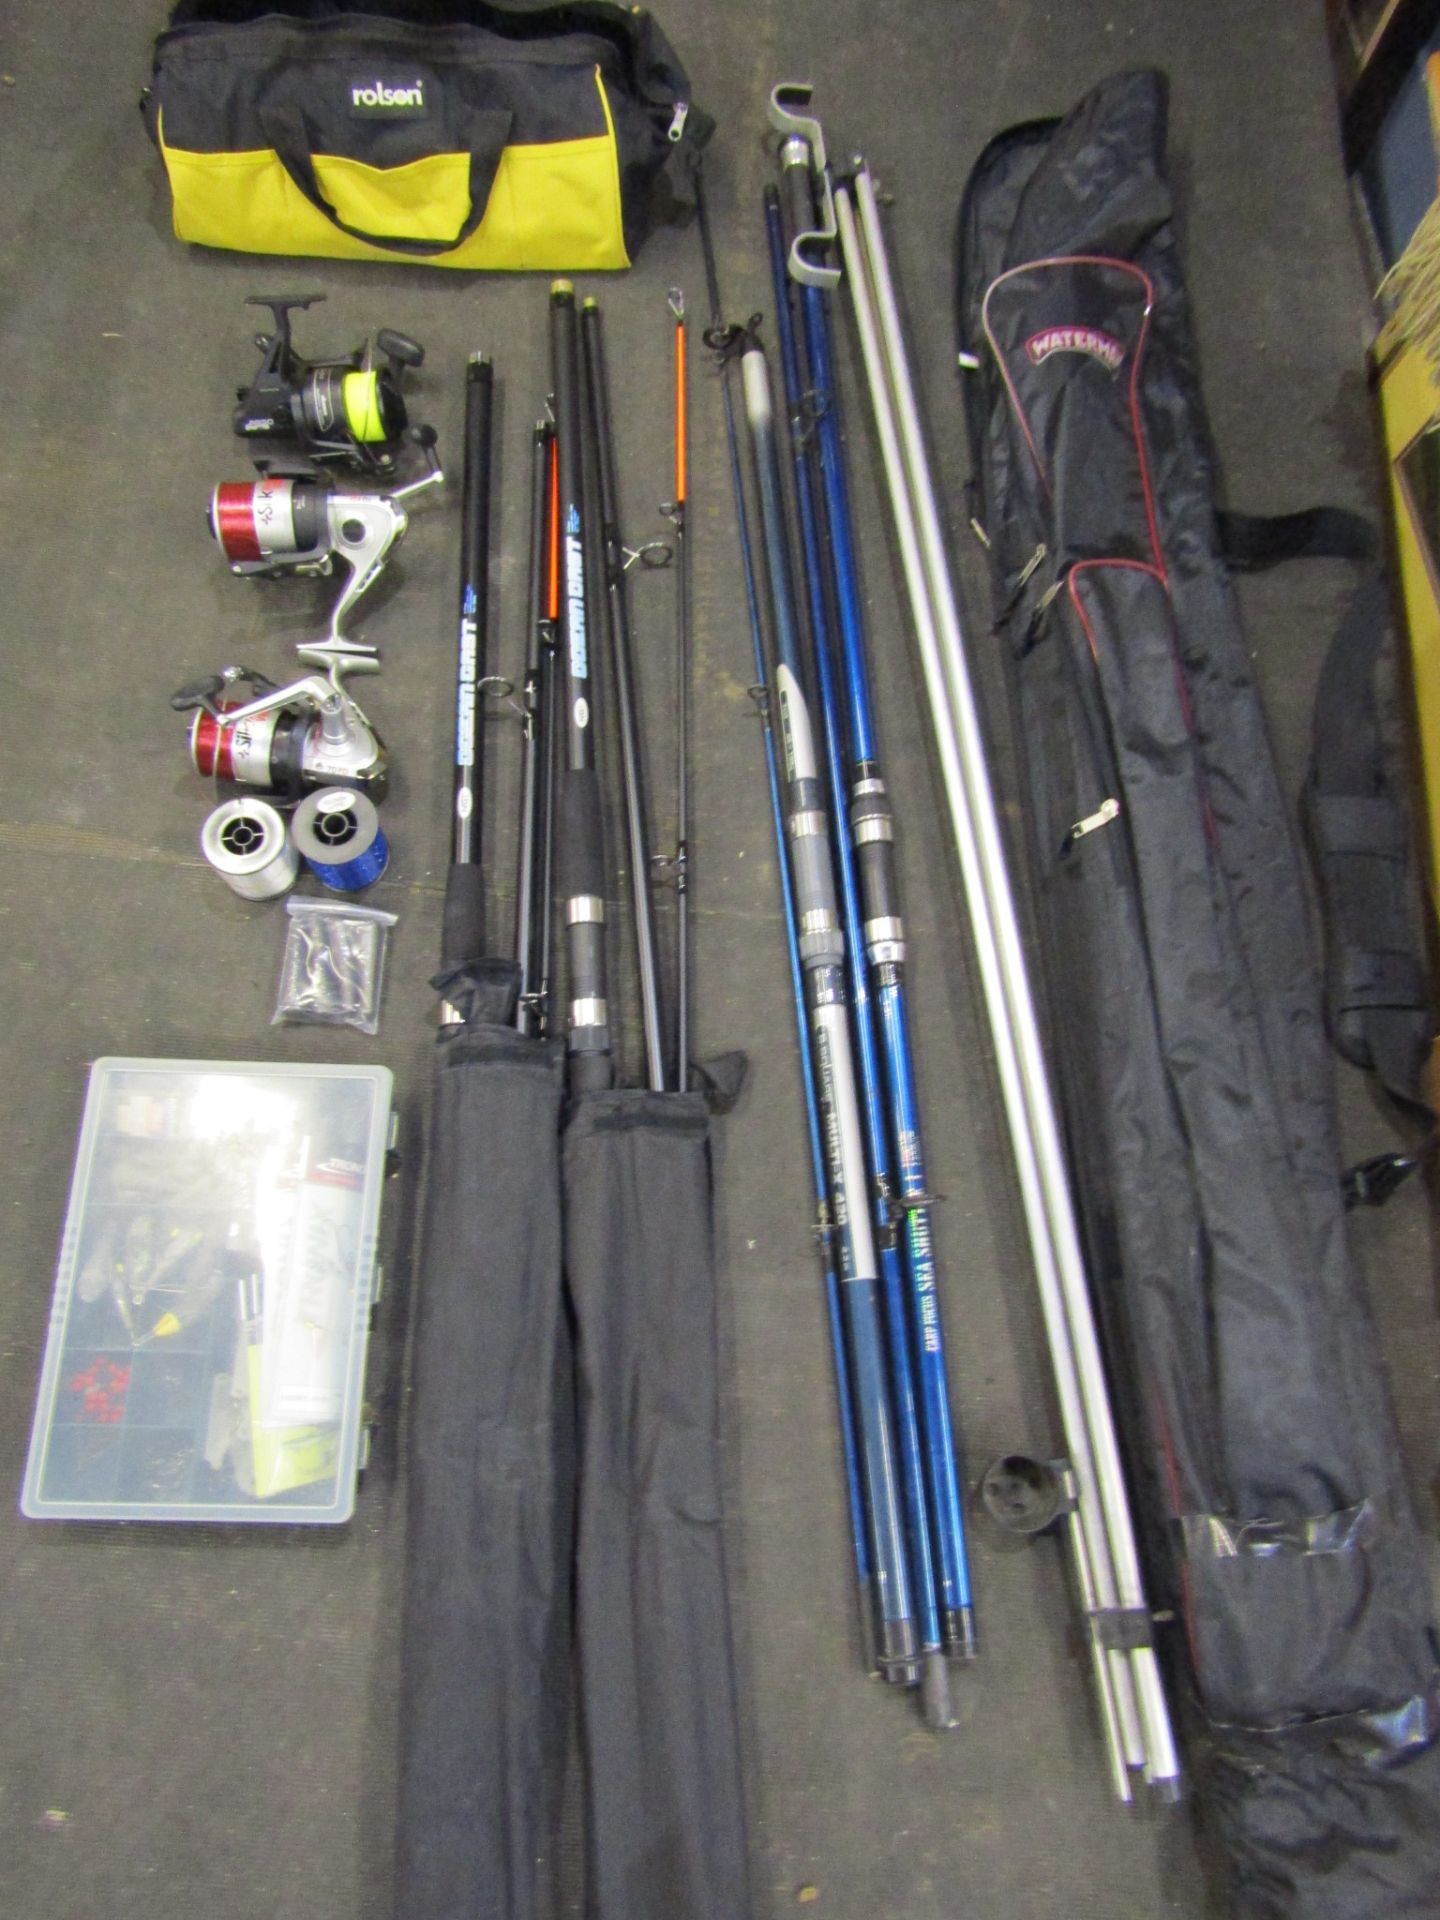 4 Sea fishing rods, 3 reels, a pole and box of tackle